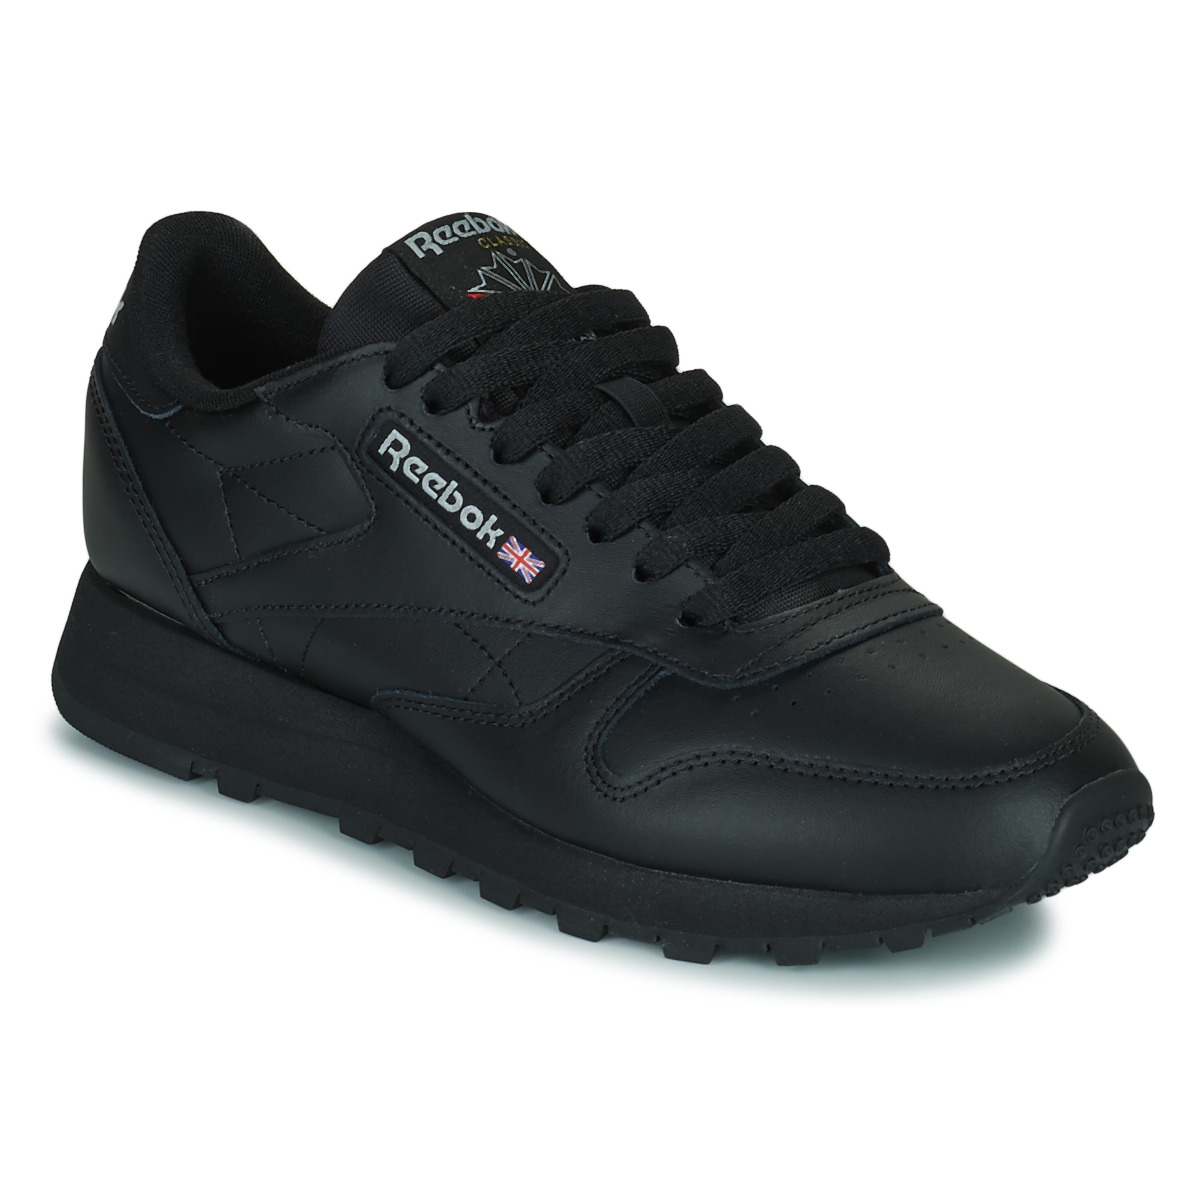 Reebok Classic CLASSIC LEATHER Black - Free delivery | Spartoo ! - Shoes Low top trainers USD/$98.50